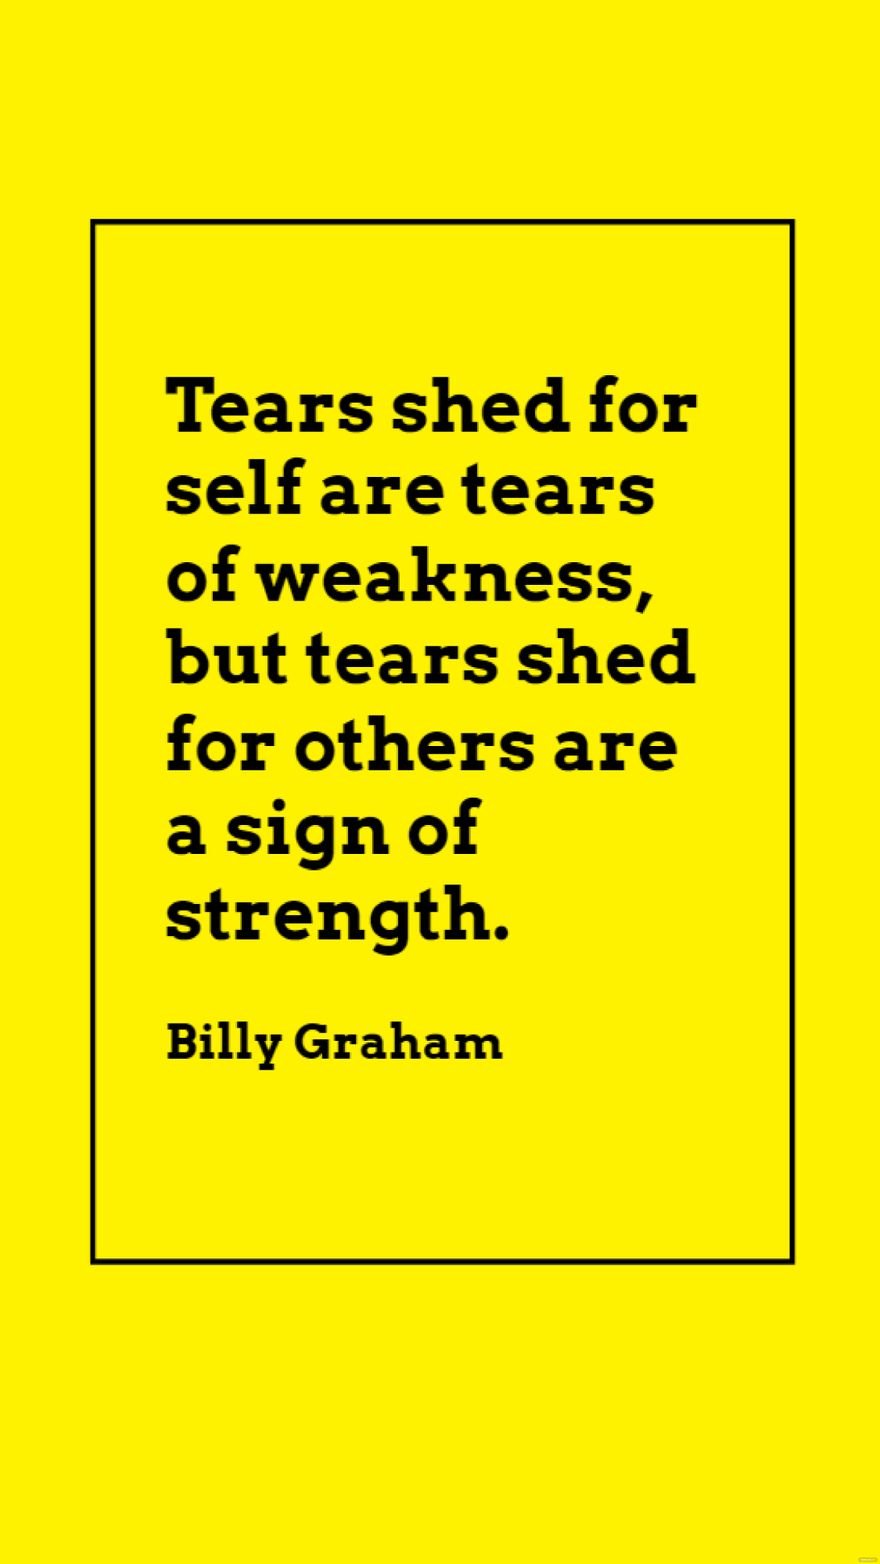 Billy Graham - Tears shed for self are tears of weakness, but tears shed for others are a sign of strength.